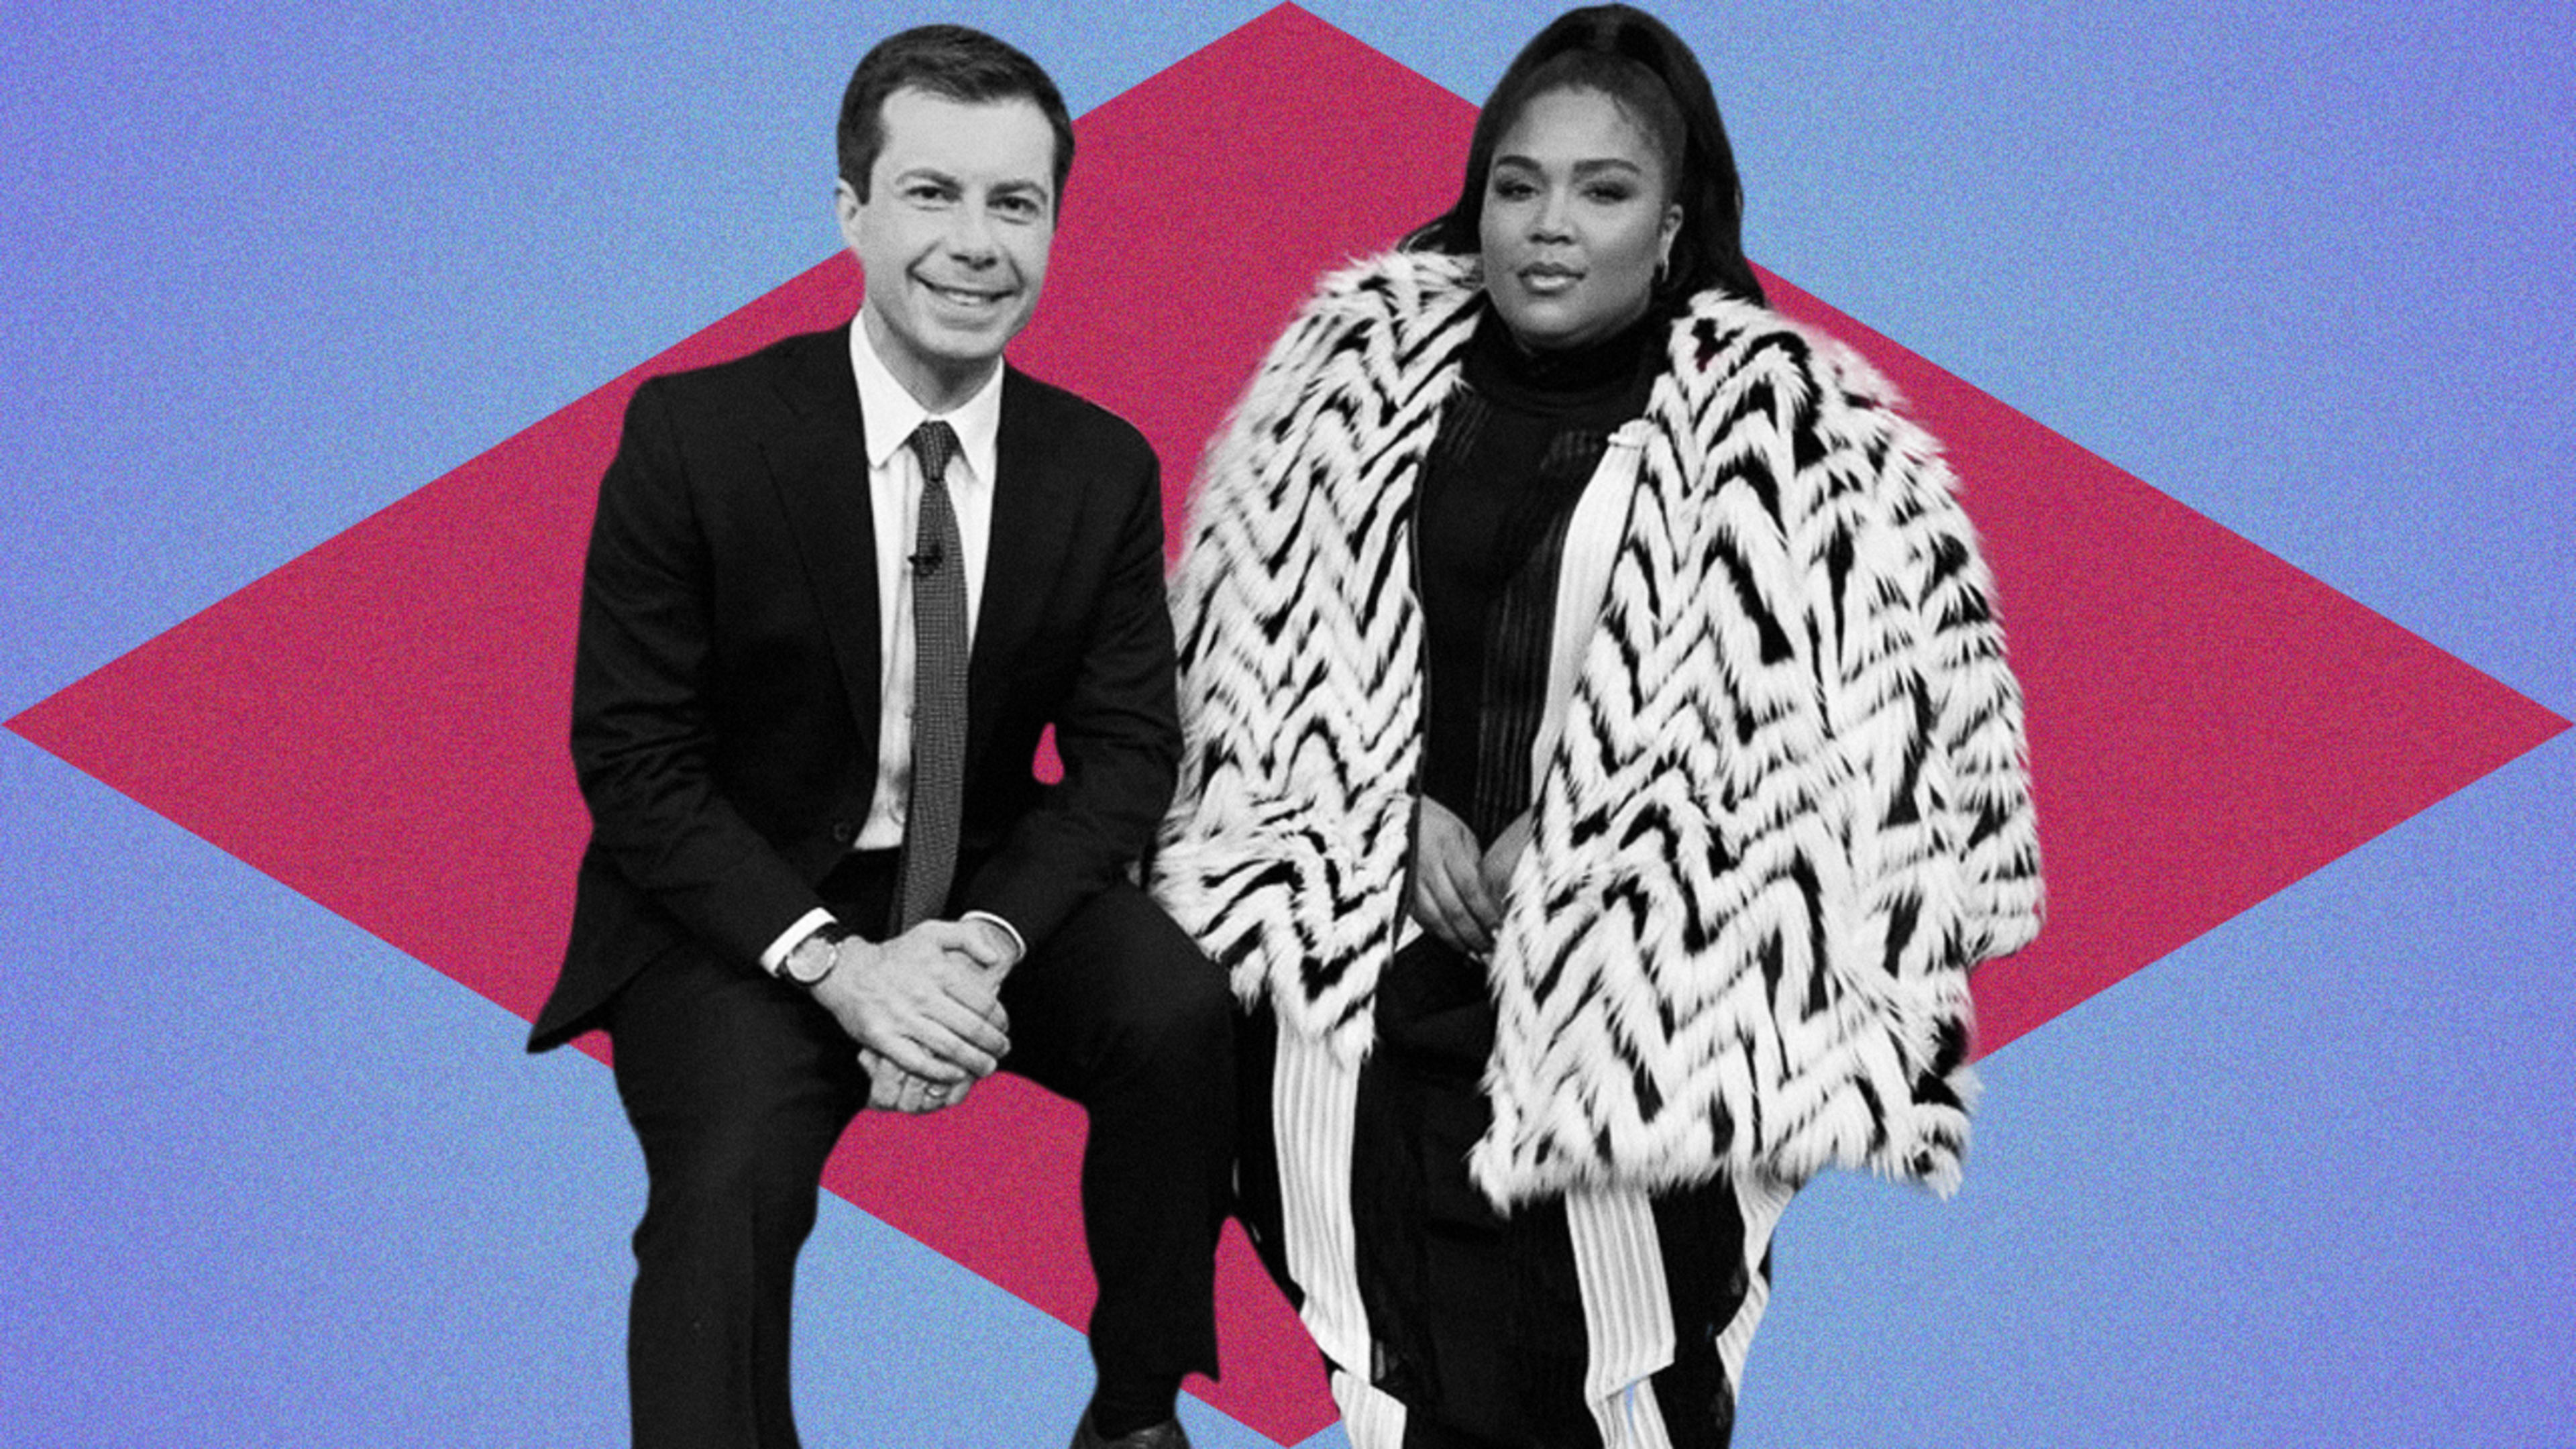 Lizzo met Mayor Pete, and Twitter went wild over their awkward photo